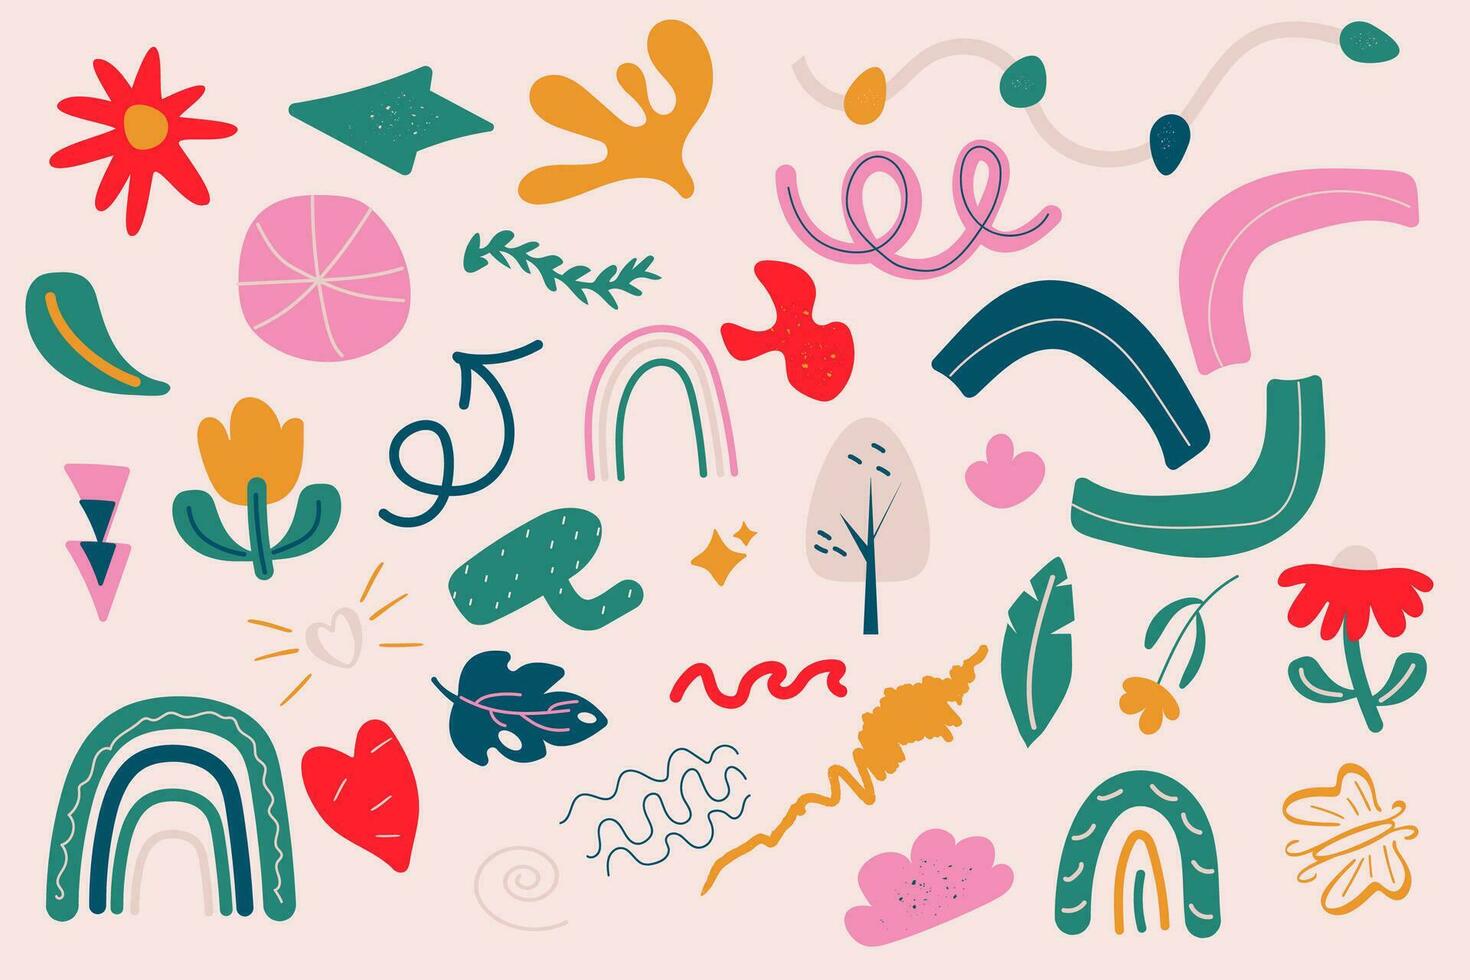 Abstract hand drawn elements, shapes vector